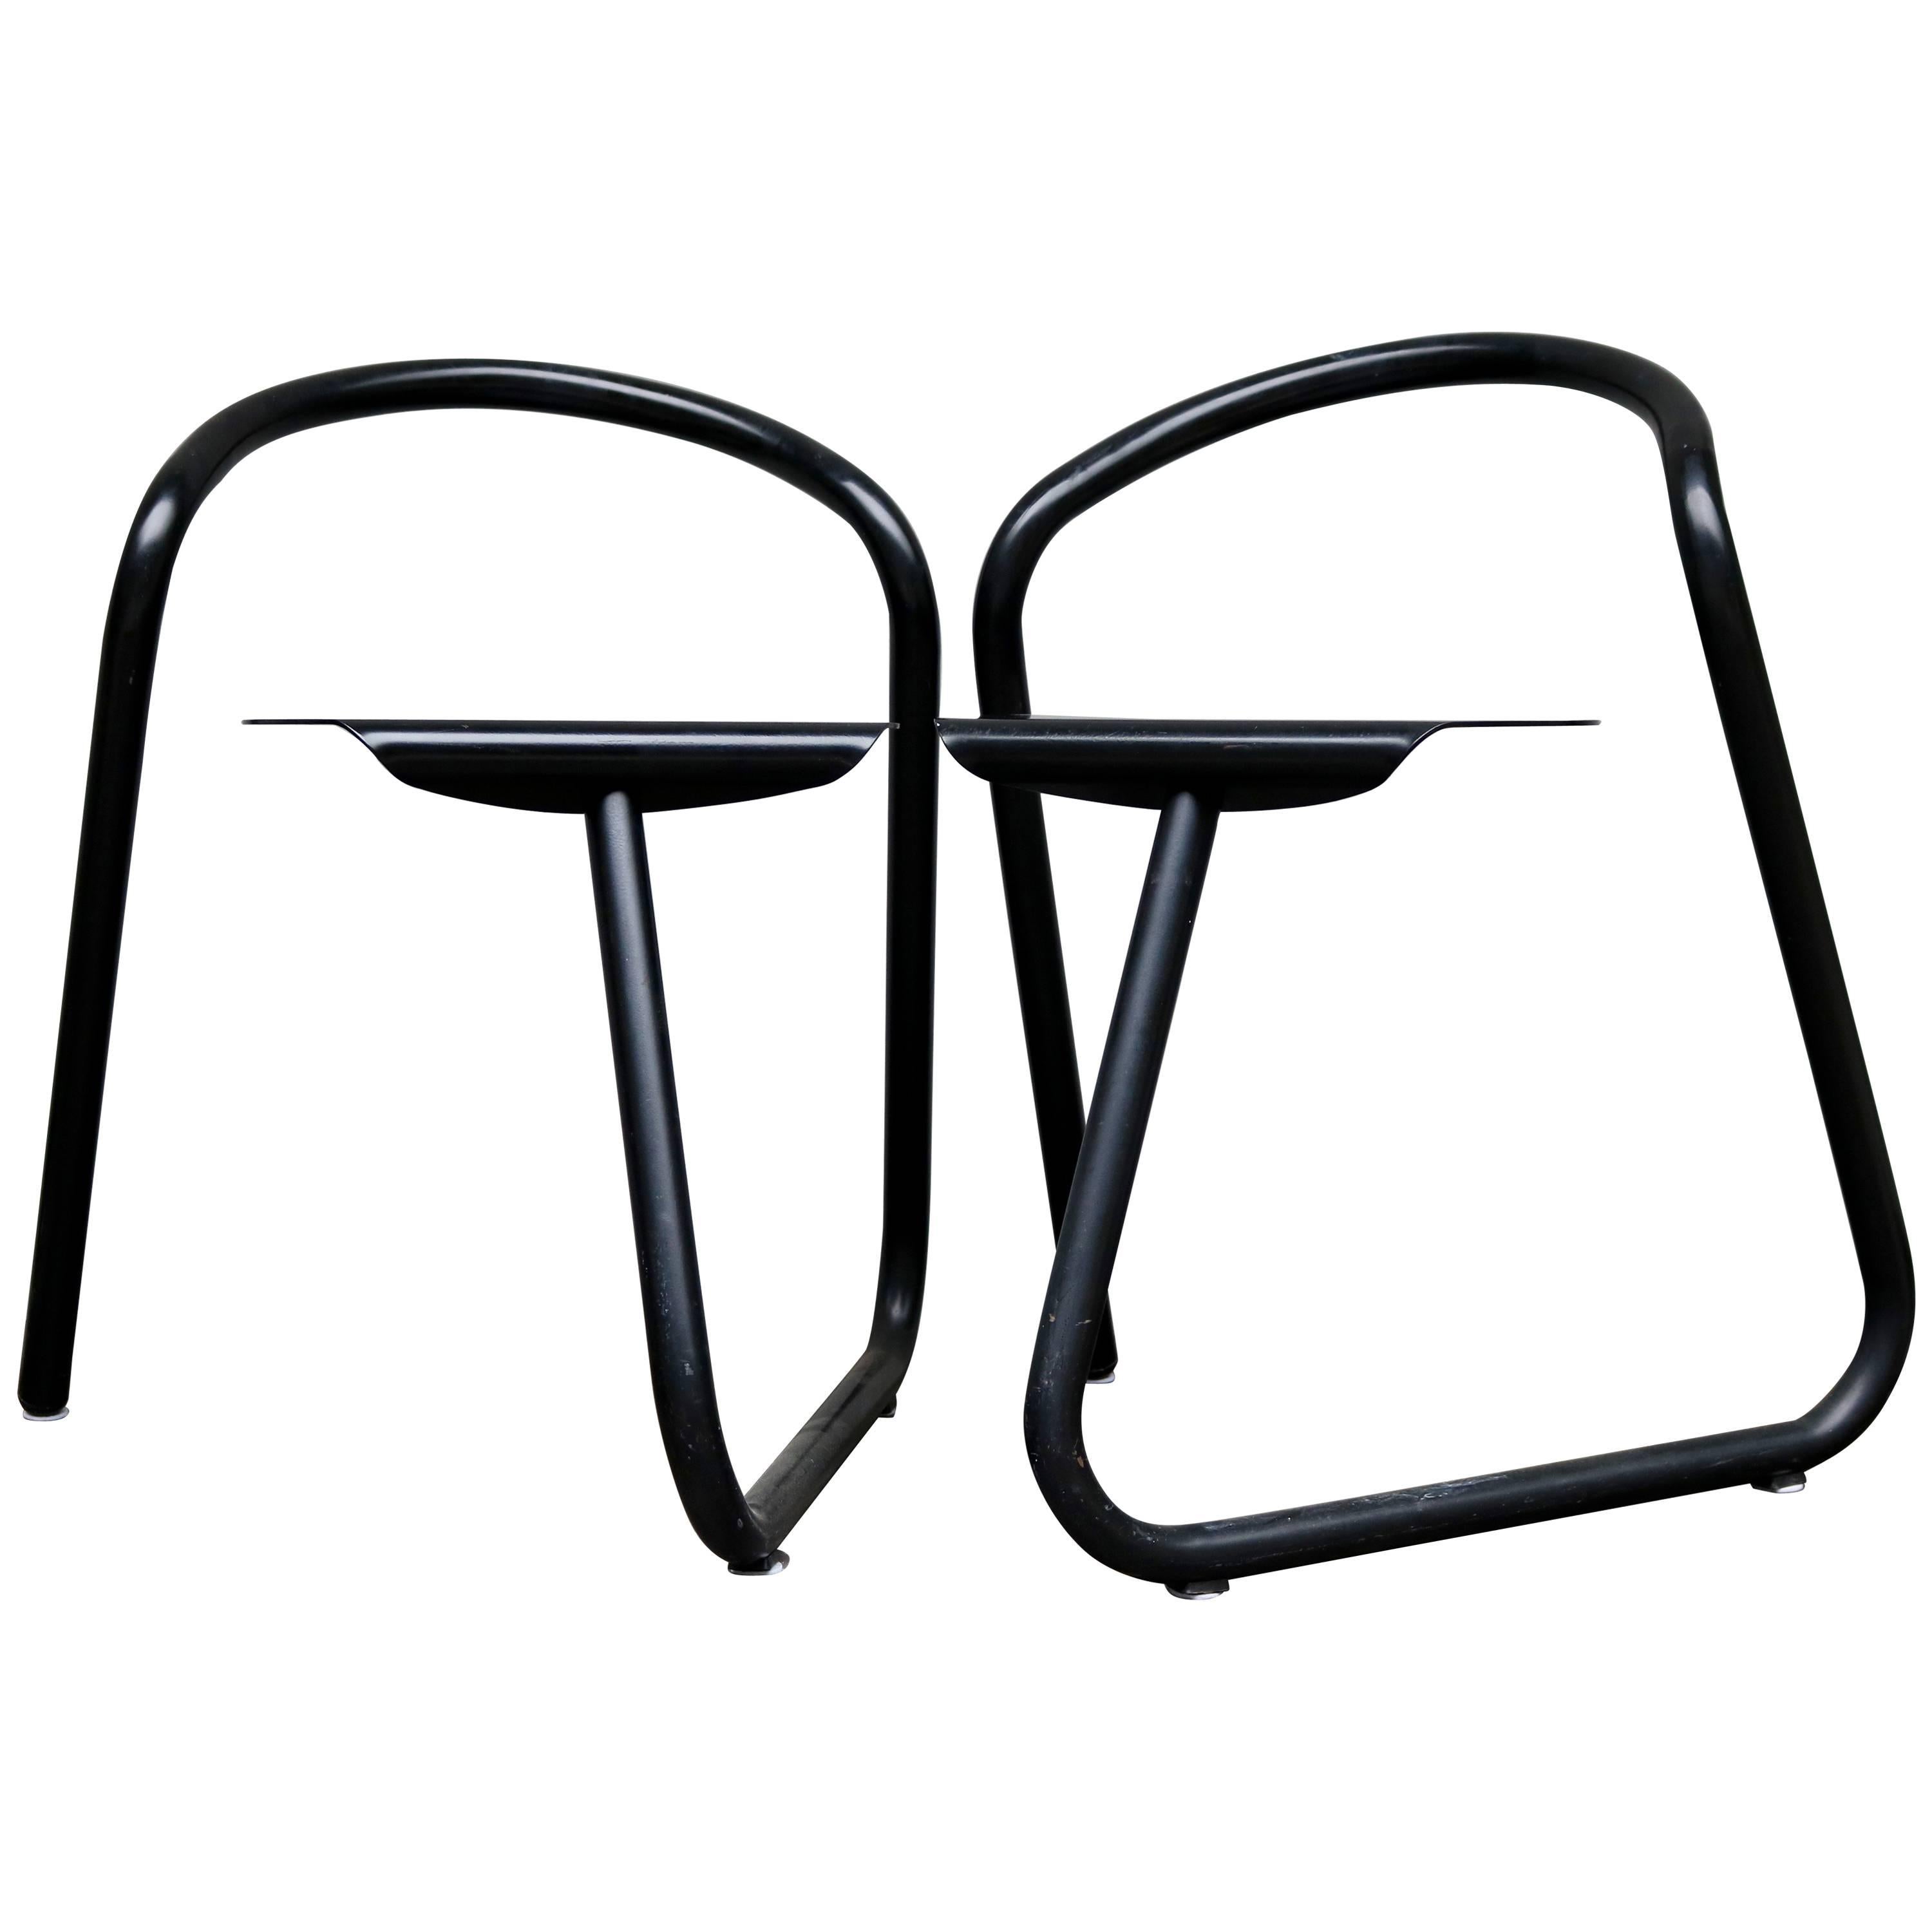 Two Aluminum Chairs from the 1970s by the Danish Designer Erik Magnussen